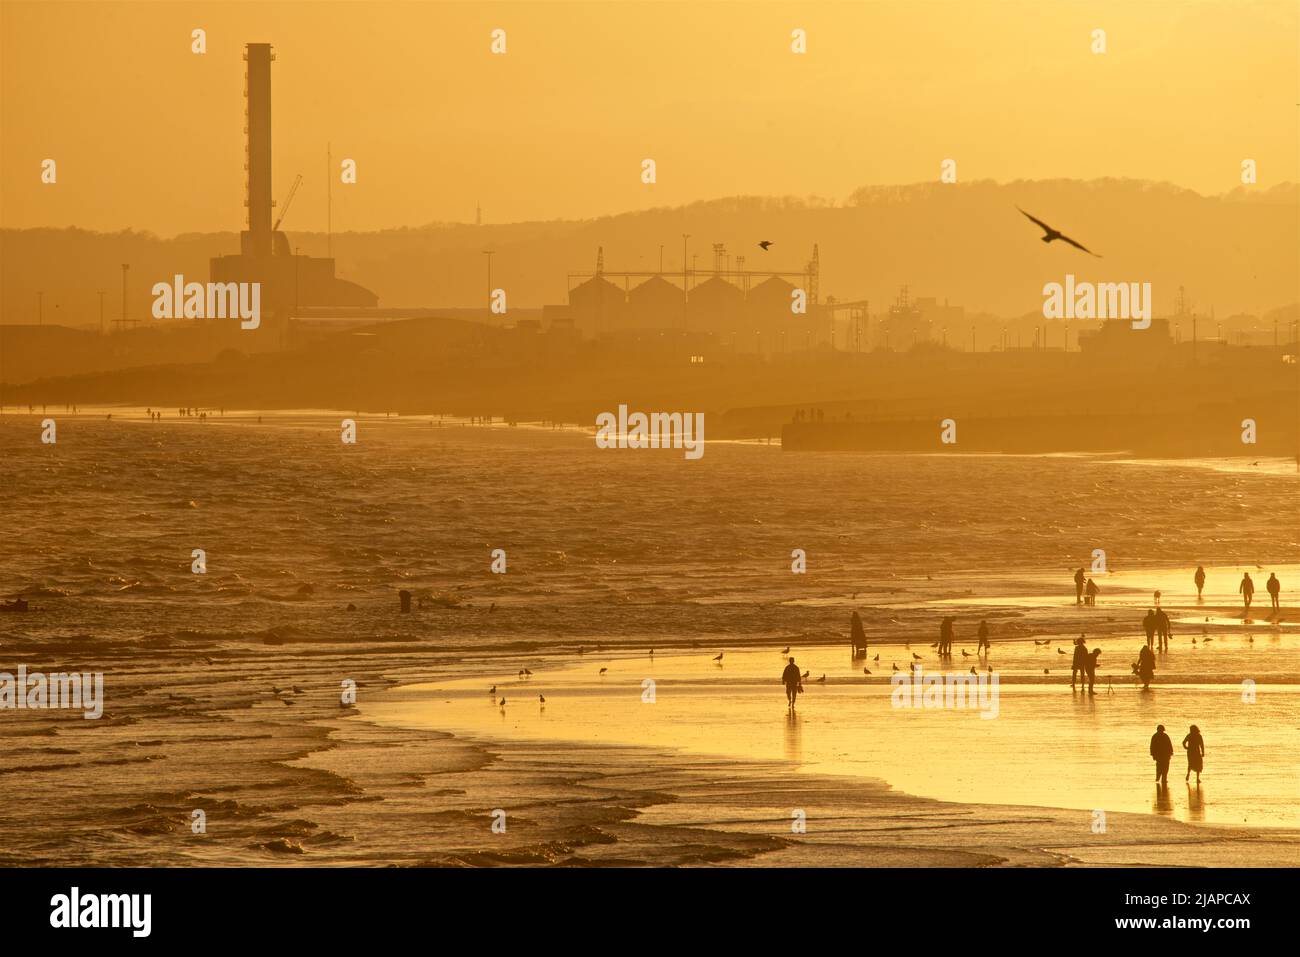 Silhouetted shapes of people on the beach at low tide, Brighton & Hove, East Sussex, England, UK. Shoreham Power Station in the distance. Stock Photo